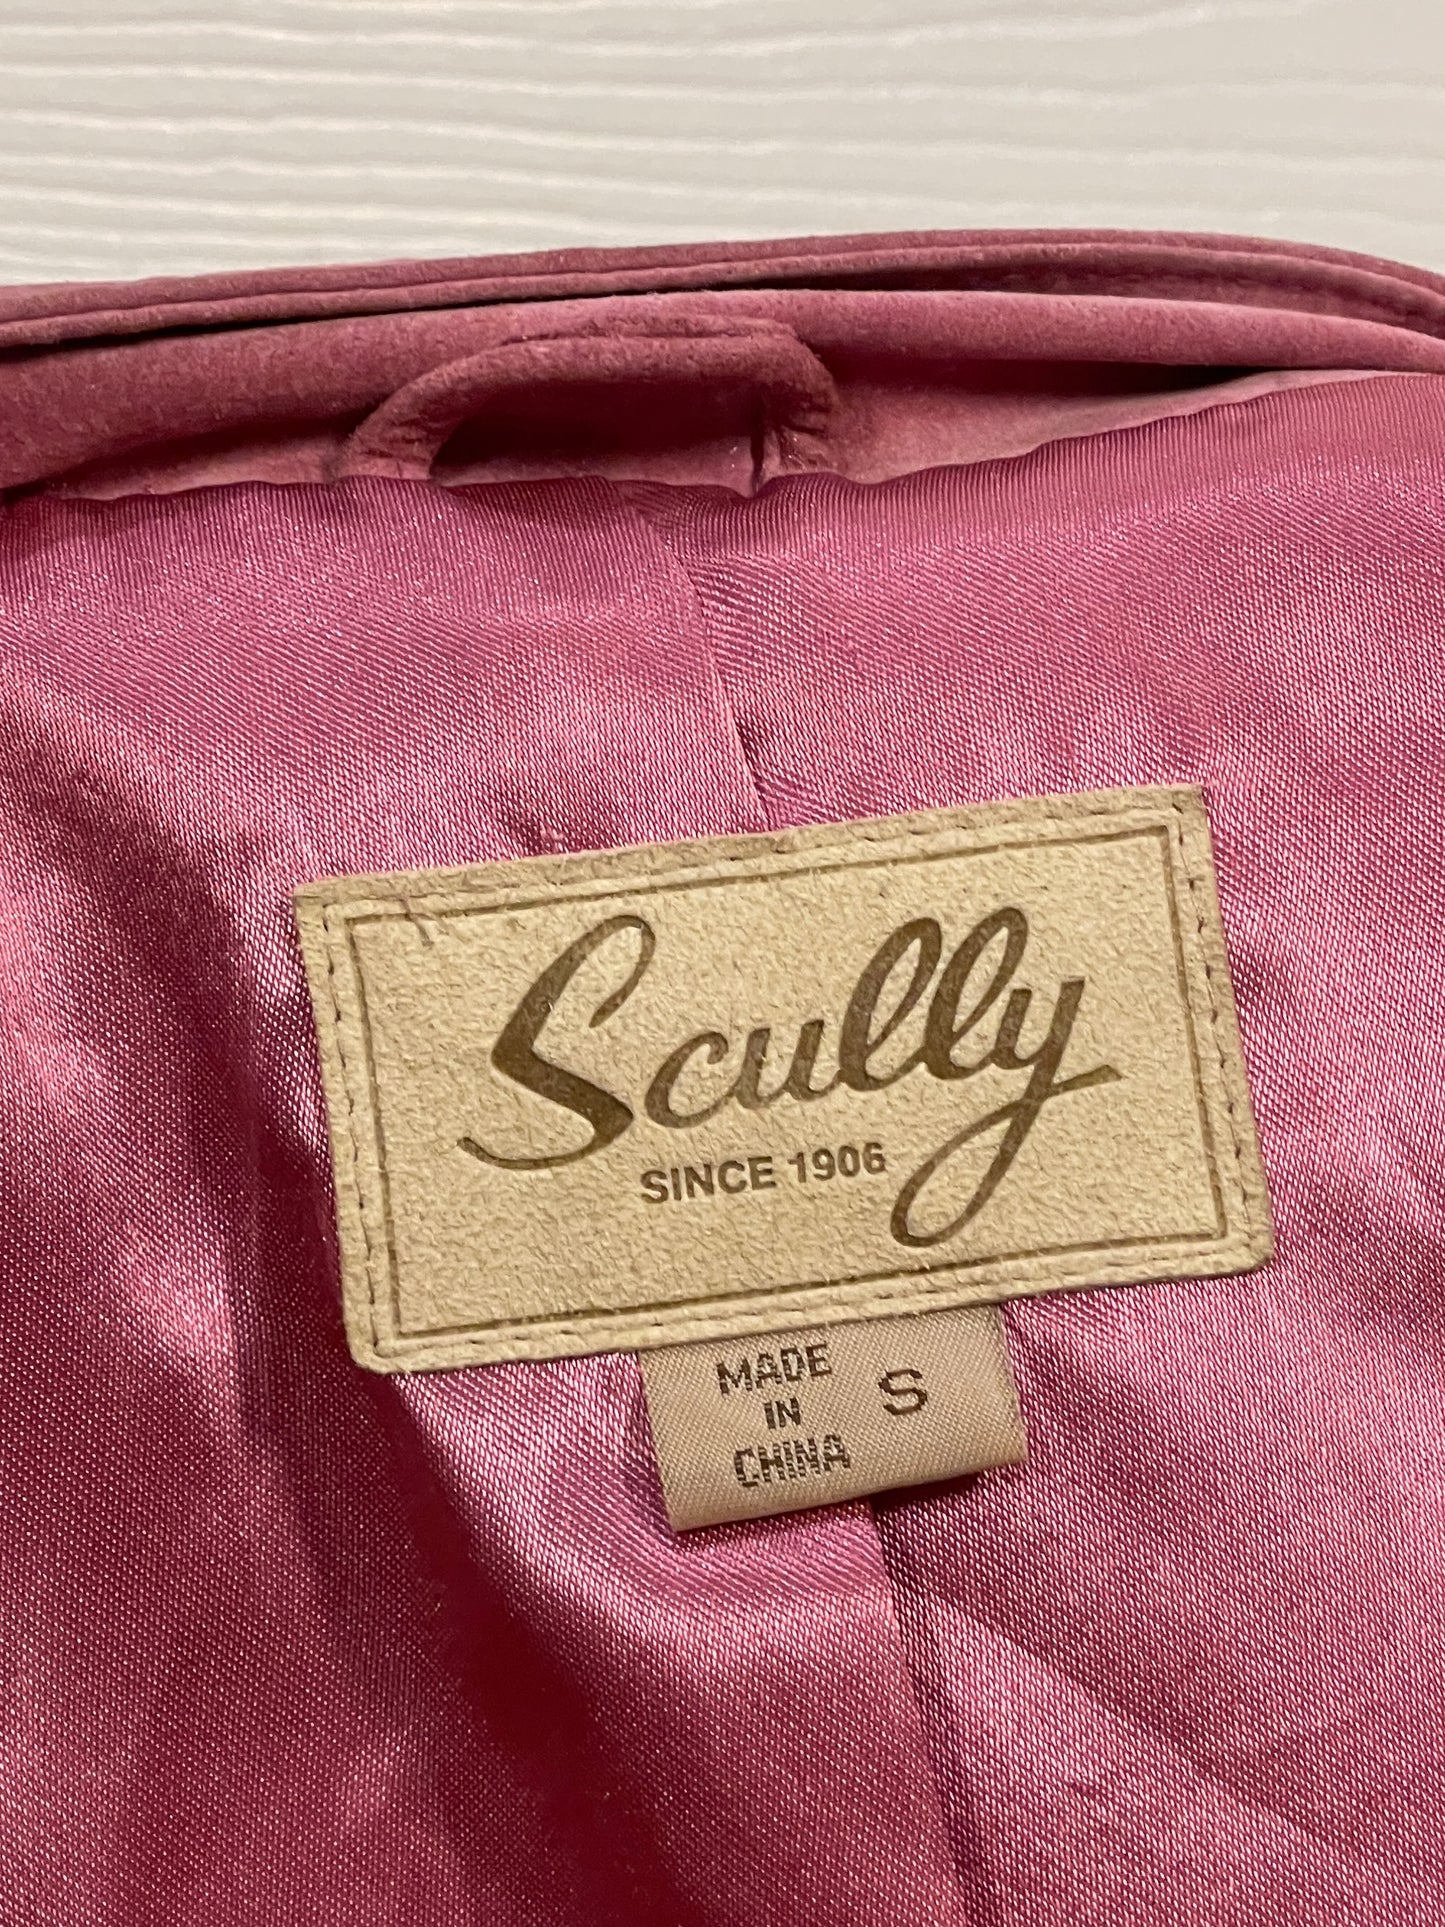 Scully Vintage Genuine Suede Leather Dusty Pink Button Jacket